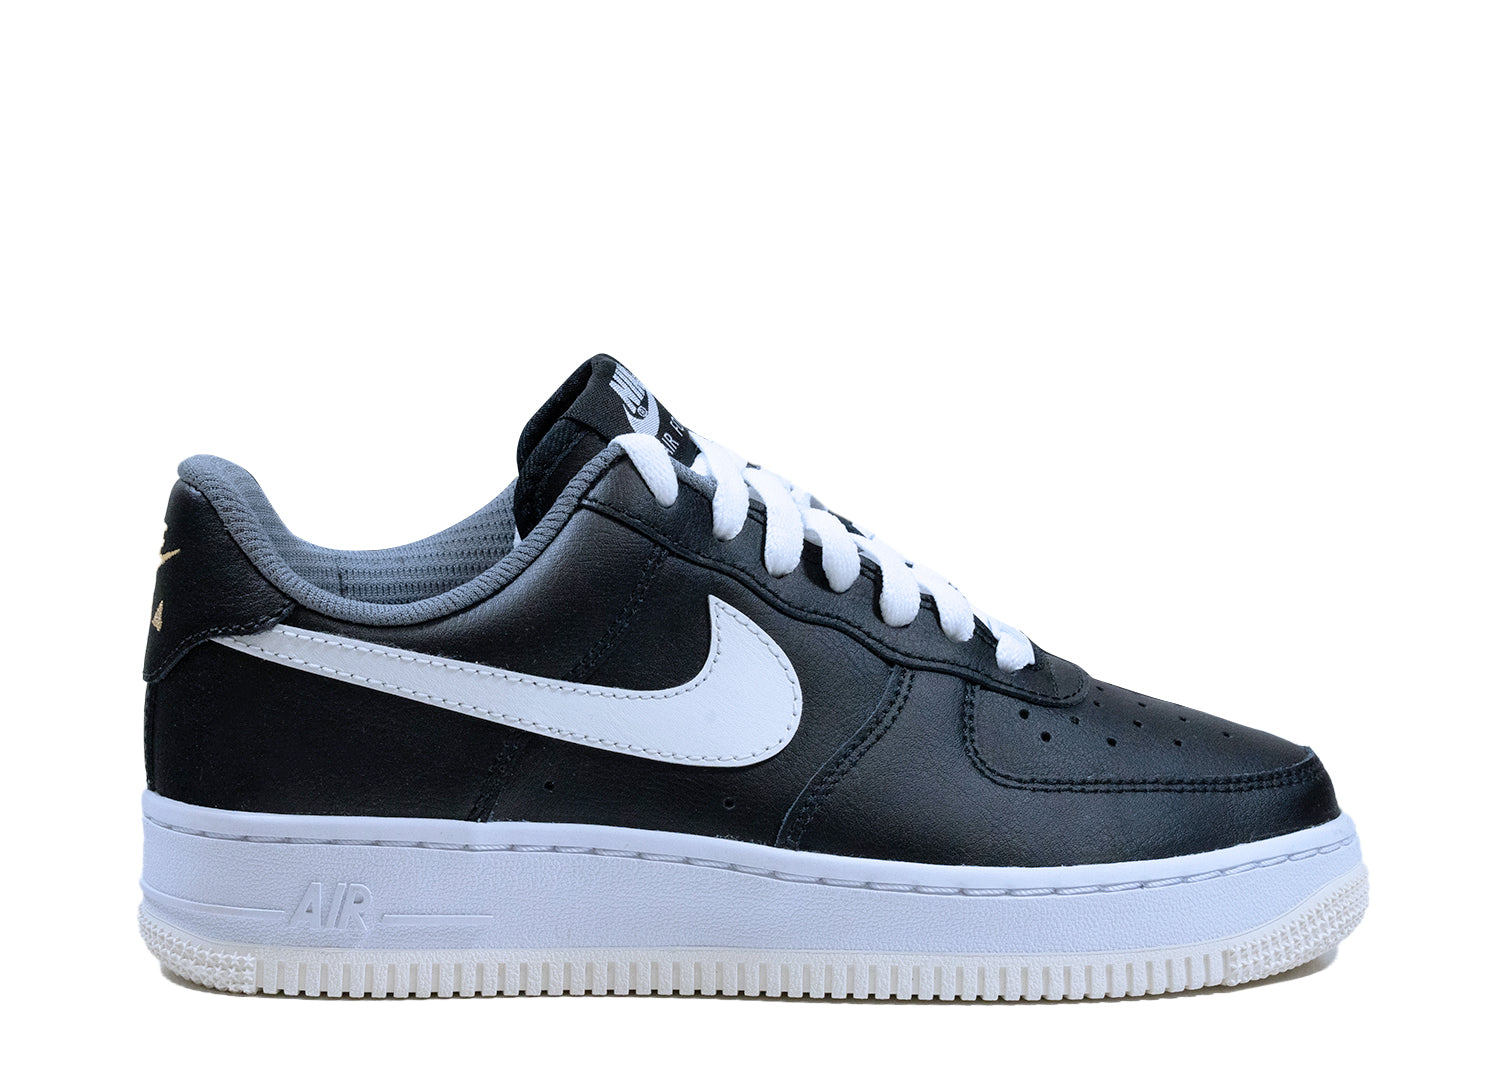 Second Chance - Multi Nike Air Force 1 ID Black/White Swoosh - 37,5 | NEW